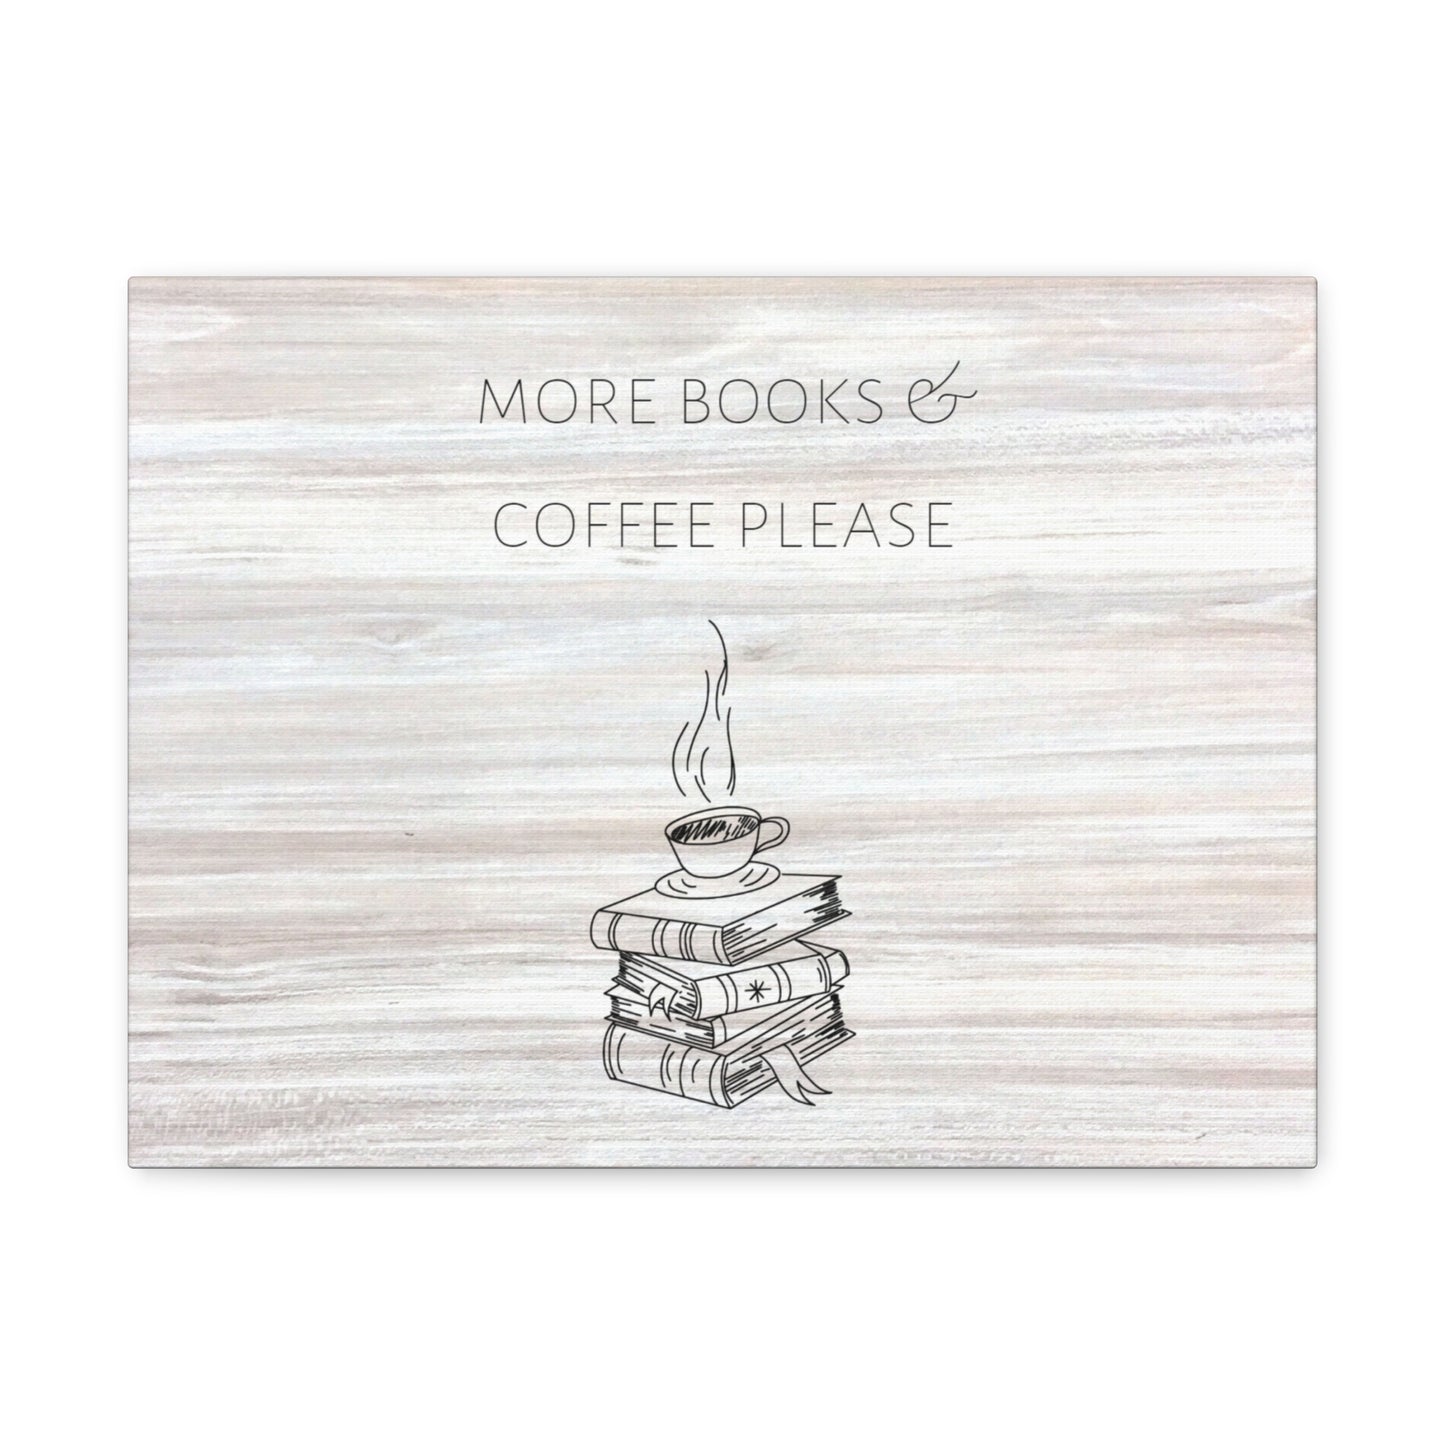 "More Books & Coffee Please" Wall Art - Weave Got Gifts - Unique Gifts You Won’t Find Anywhere Else!